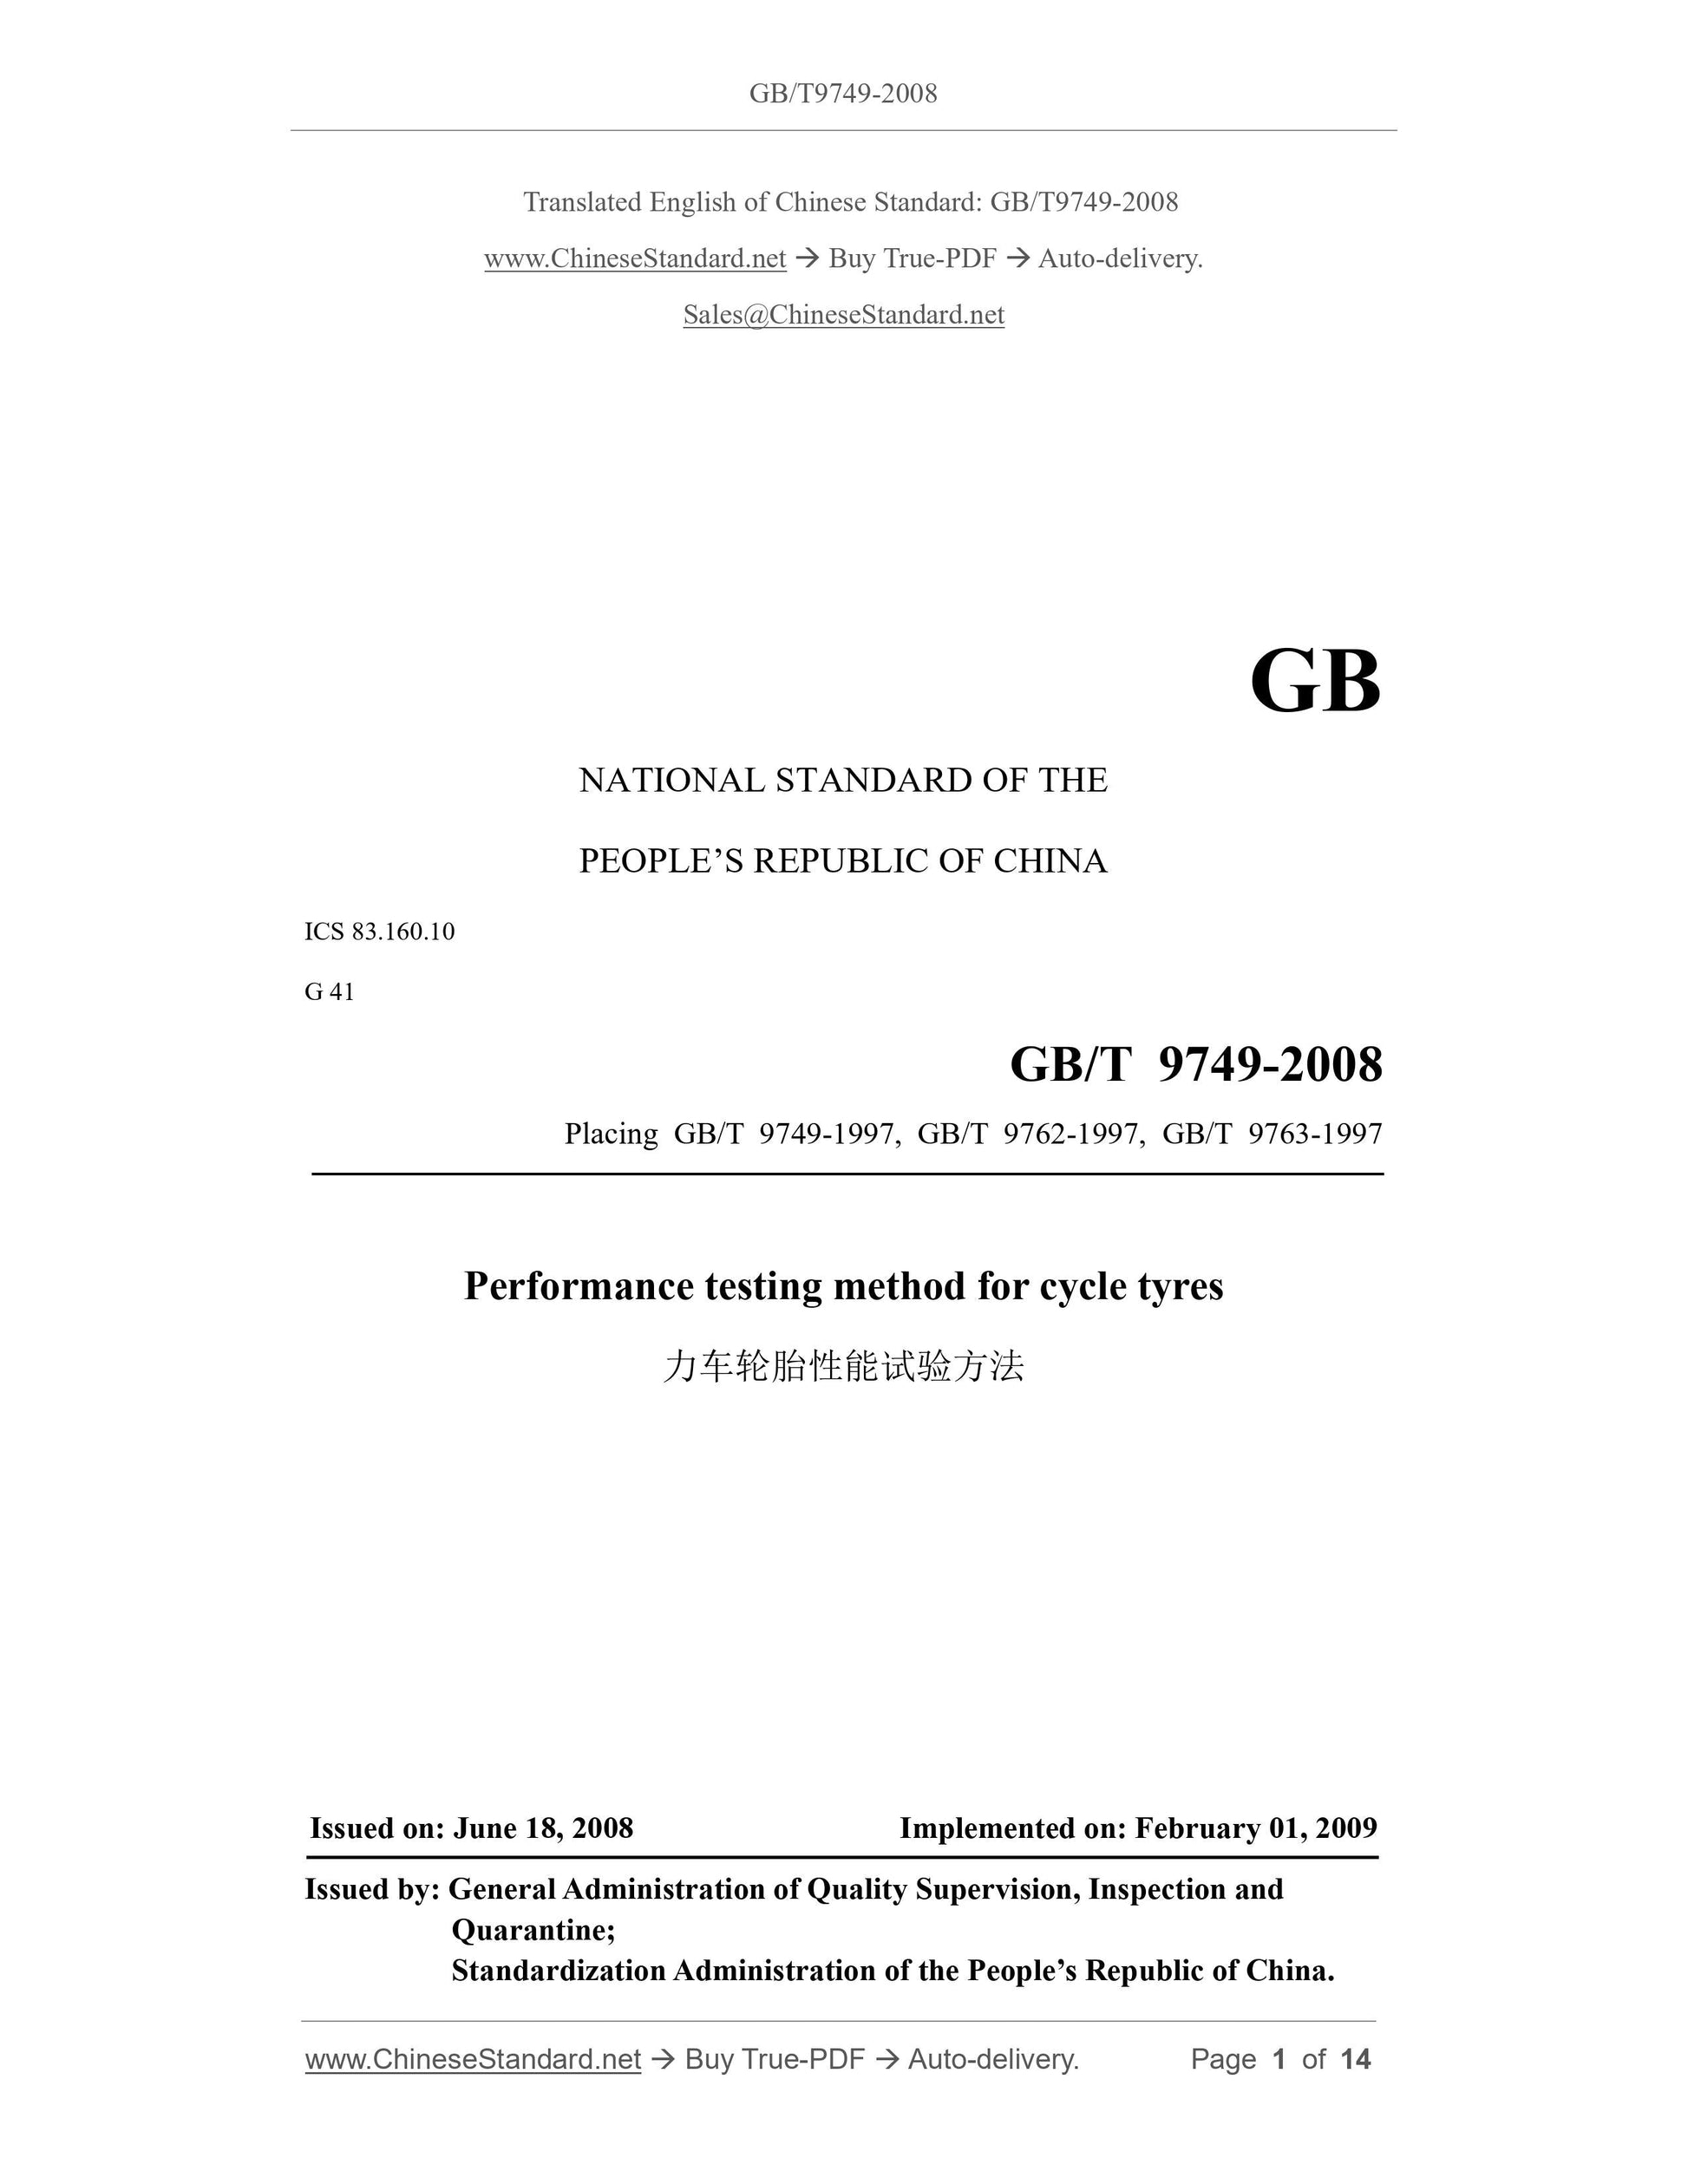 GB/T 9749-2008 Page 1